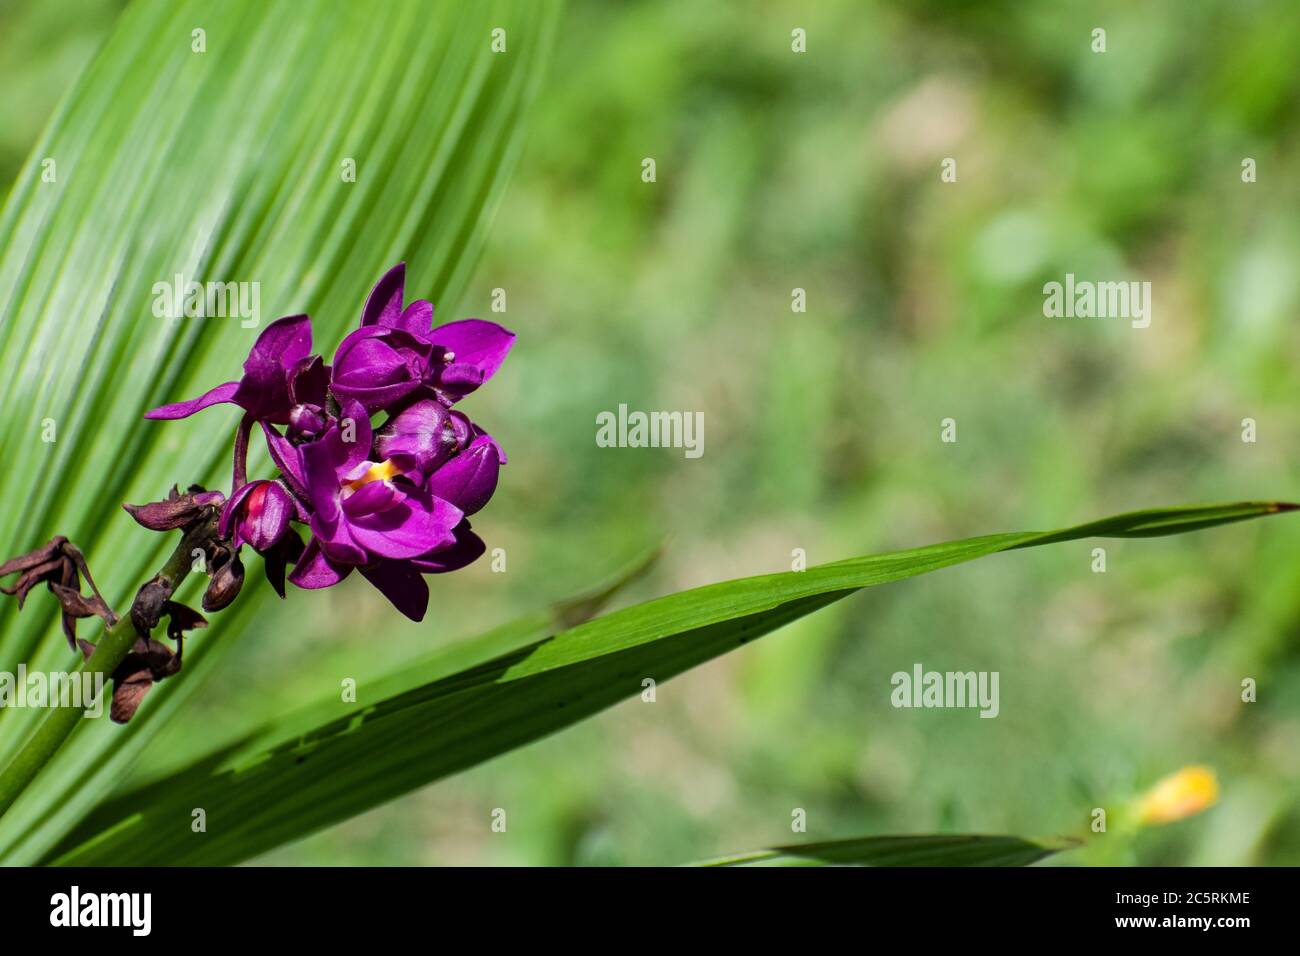 Group of purple spathoglottis plicata or Philippine ground orchid flowers and bulbs against blurred background of nature with green leaves and grass. Stock Photo